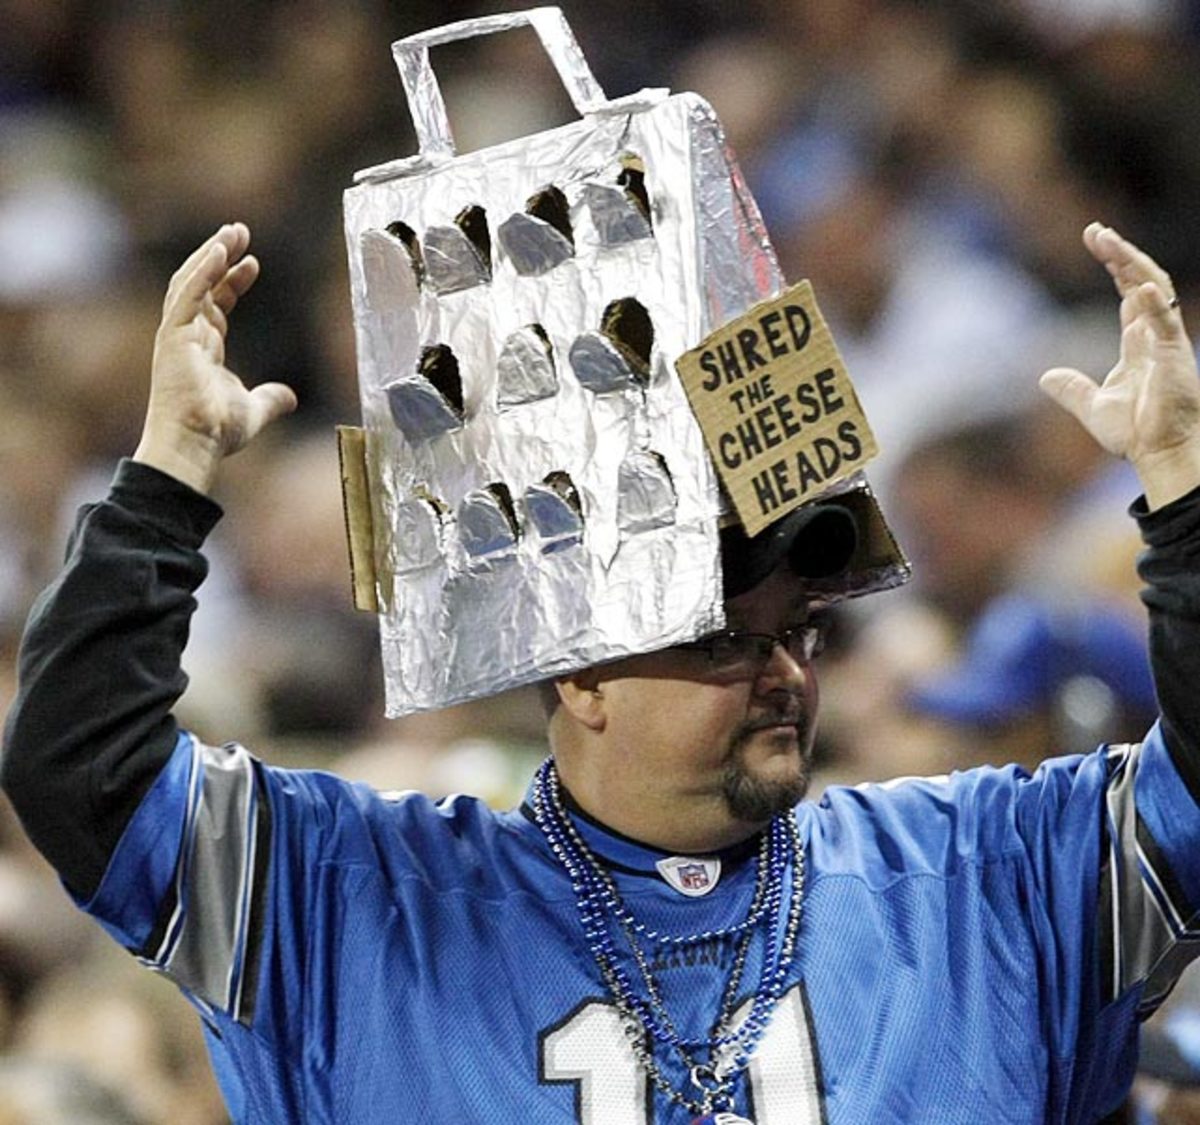 Lions fan with grater hat is a threat to cheeseheads everywhere